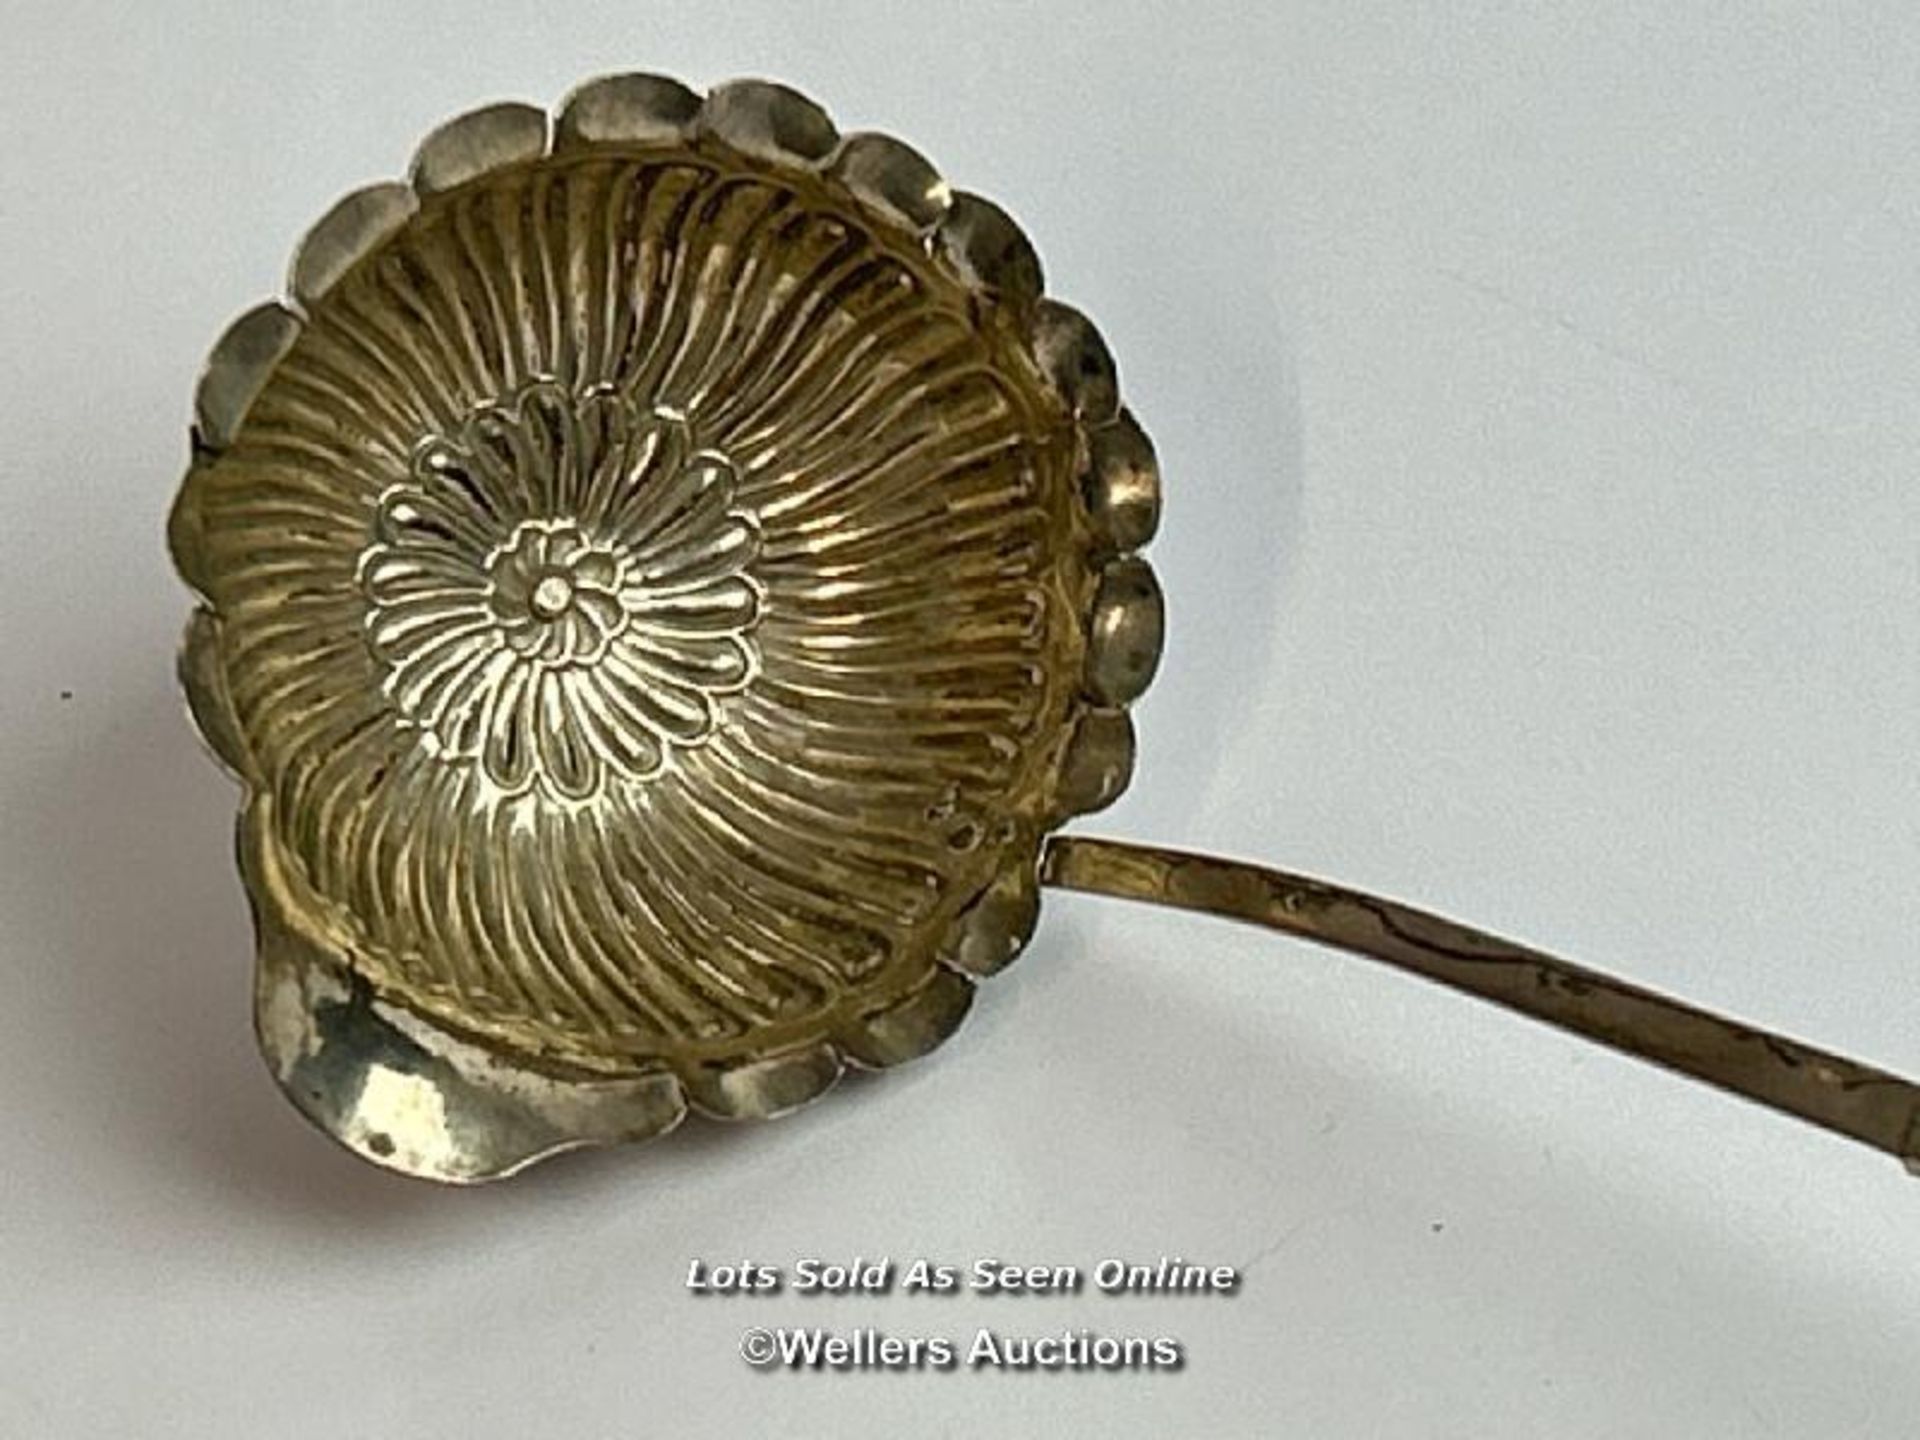 White metal toddy ladle, the bowl shaped as a flower, 35cm long / T42 - Image 2 of 4